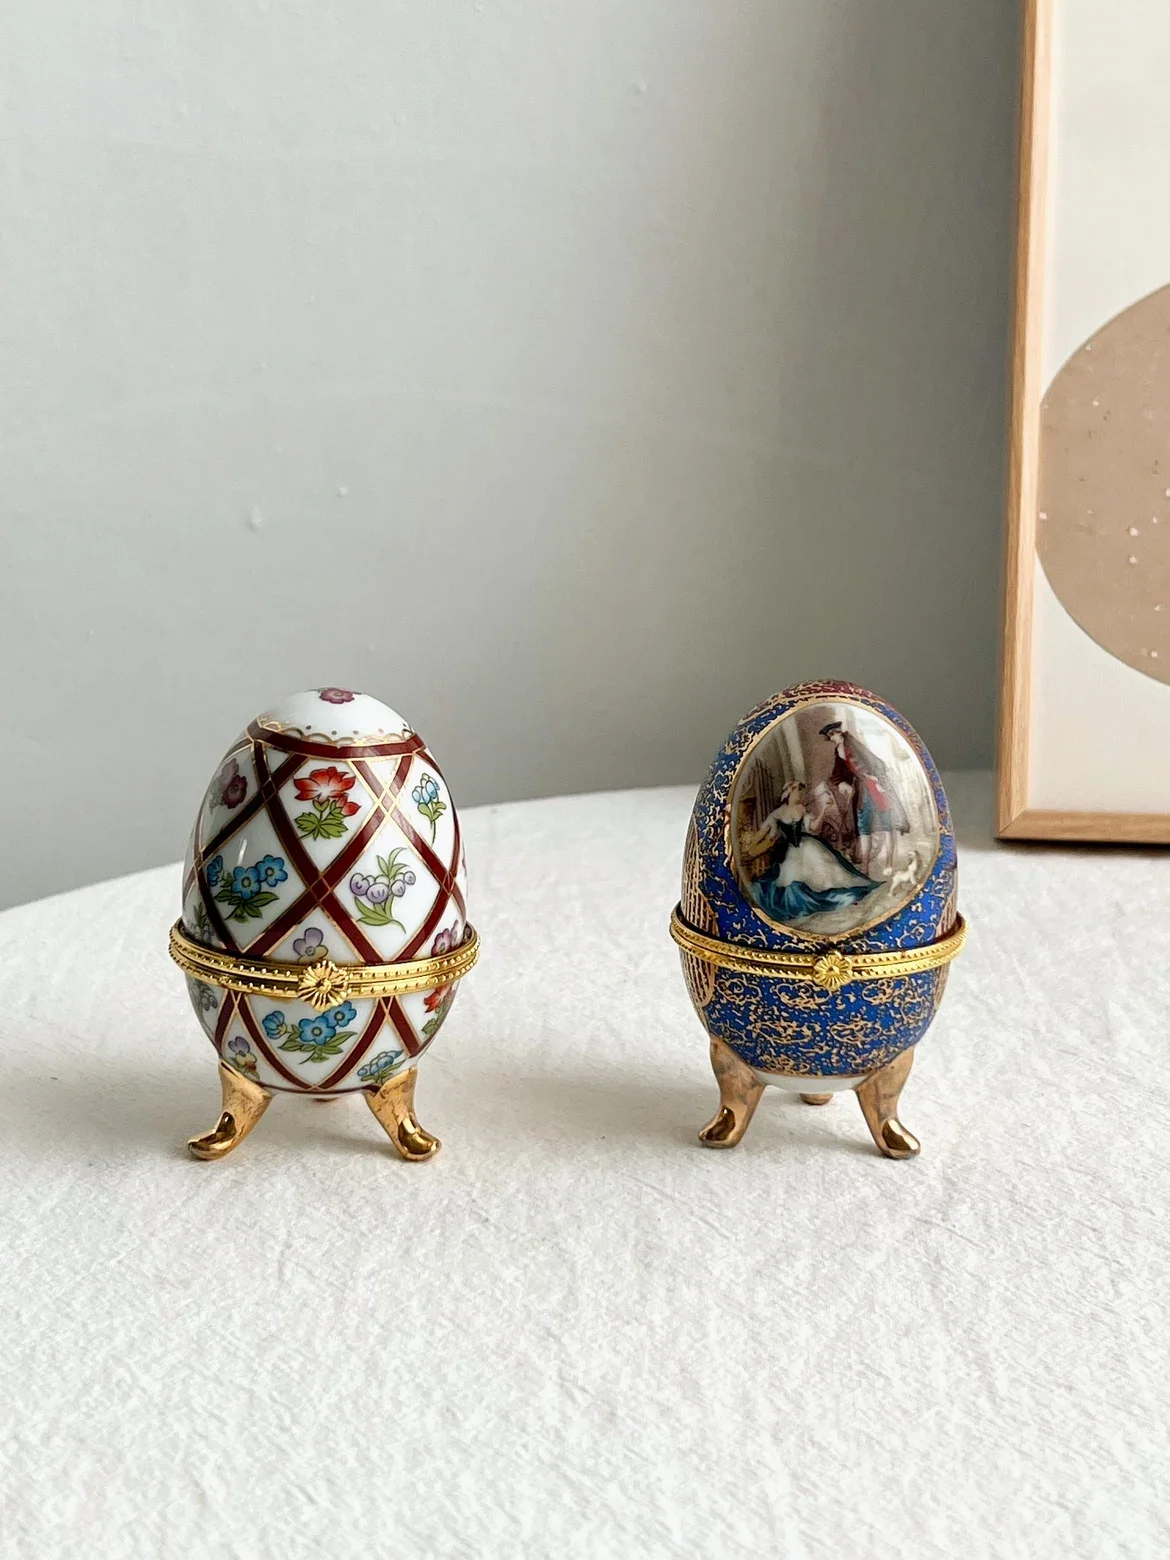 

The export of old goods is not perfect and has traces of time. Australian brands specially designed egg shaped ceramic jewelry b